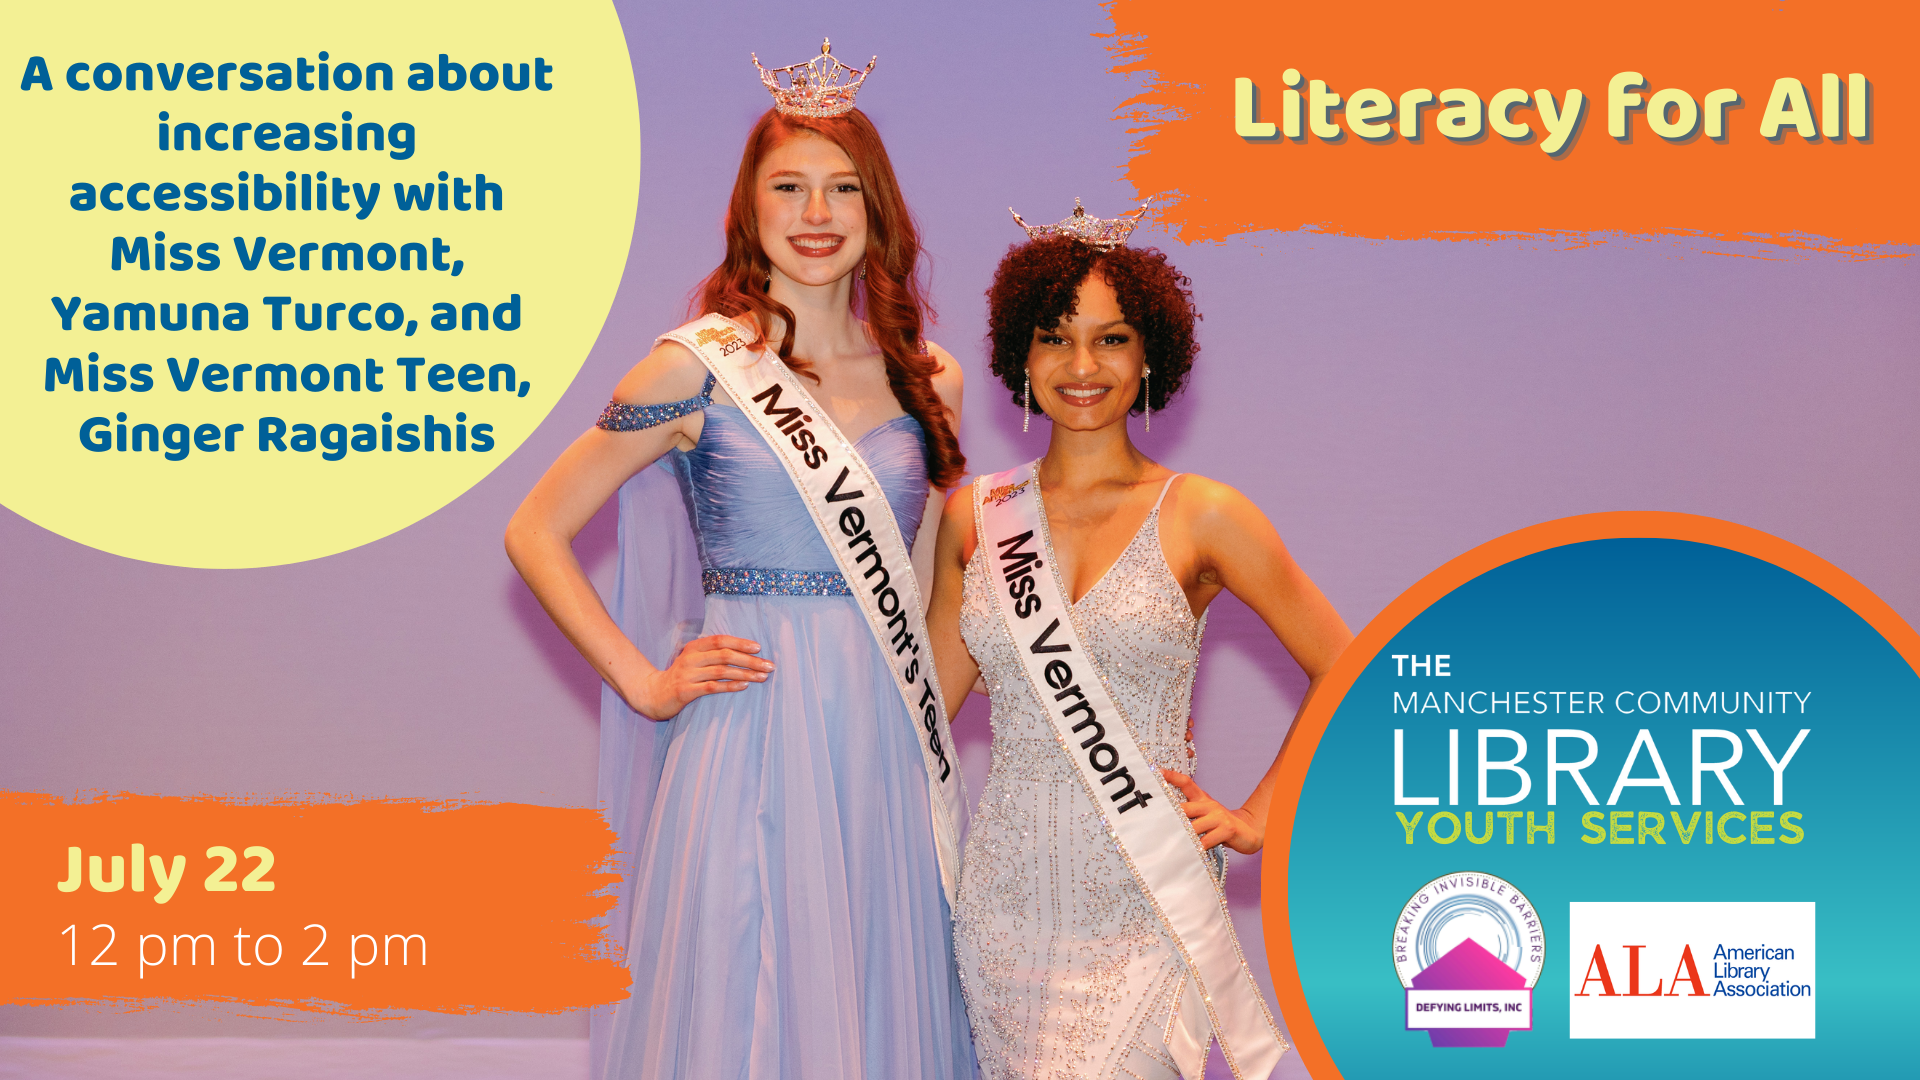 A conversation about increasing accessibility with Miss Vermont, Yamuna Turco, and Miss Vermont Teen, Ginger Ragaishis